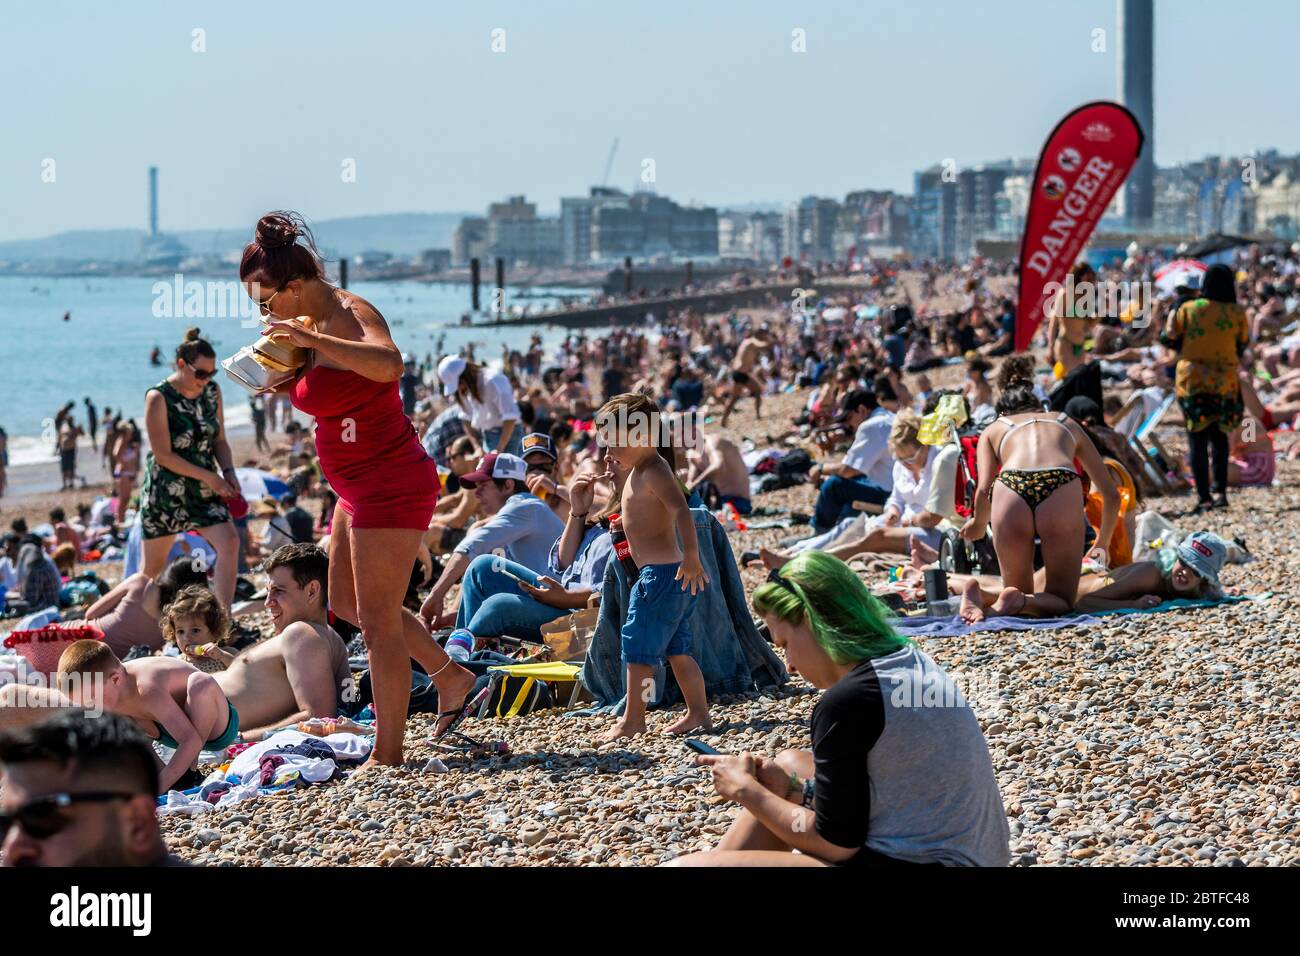 Brighton, UK. 25th May, 2020. It is sunny and people come to the beach and the seaside at Brighton, during Bank holiday Monday. It is busy but still plentyu of room for social distancing. The eased 'lockdown' continues for the Coronavirus (Covid 19) outbreak. Credit: Guy Bell/Alamy Live News Stock Photo